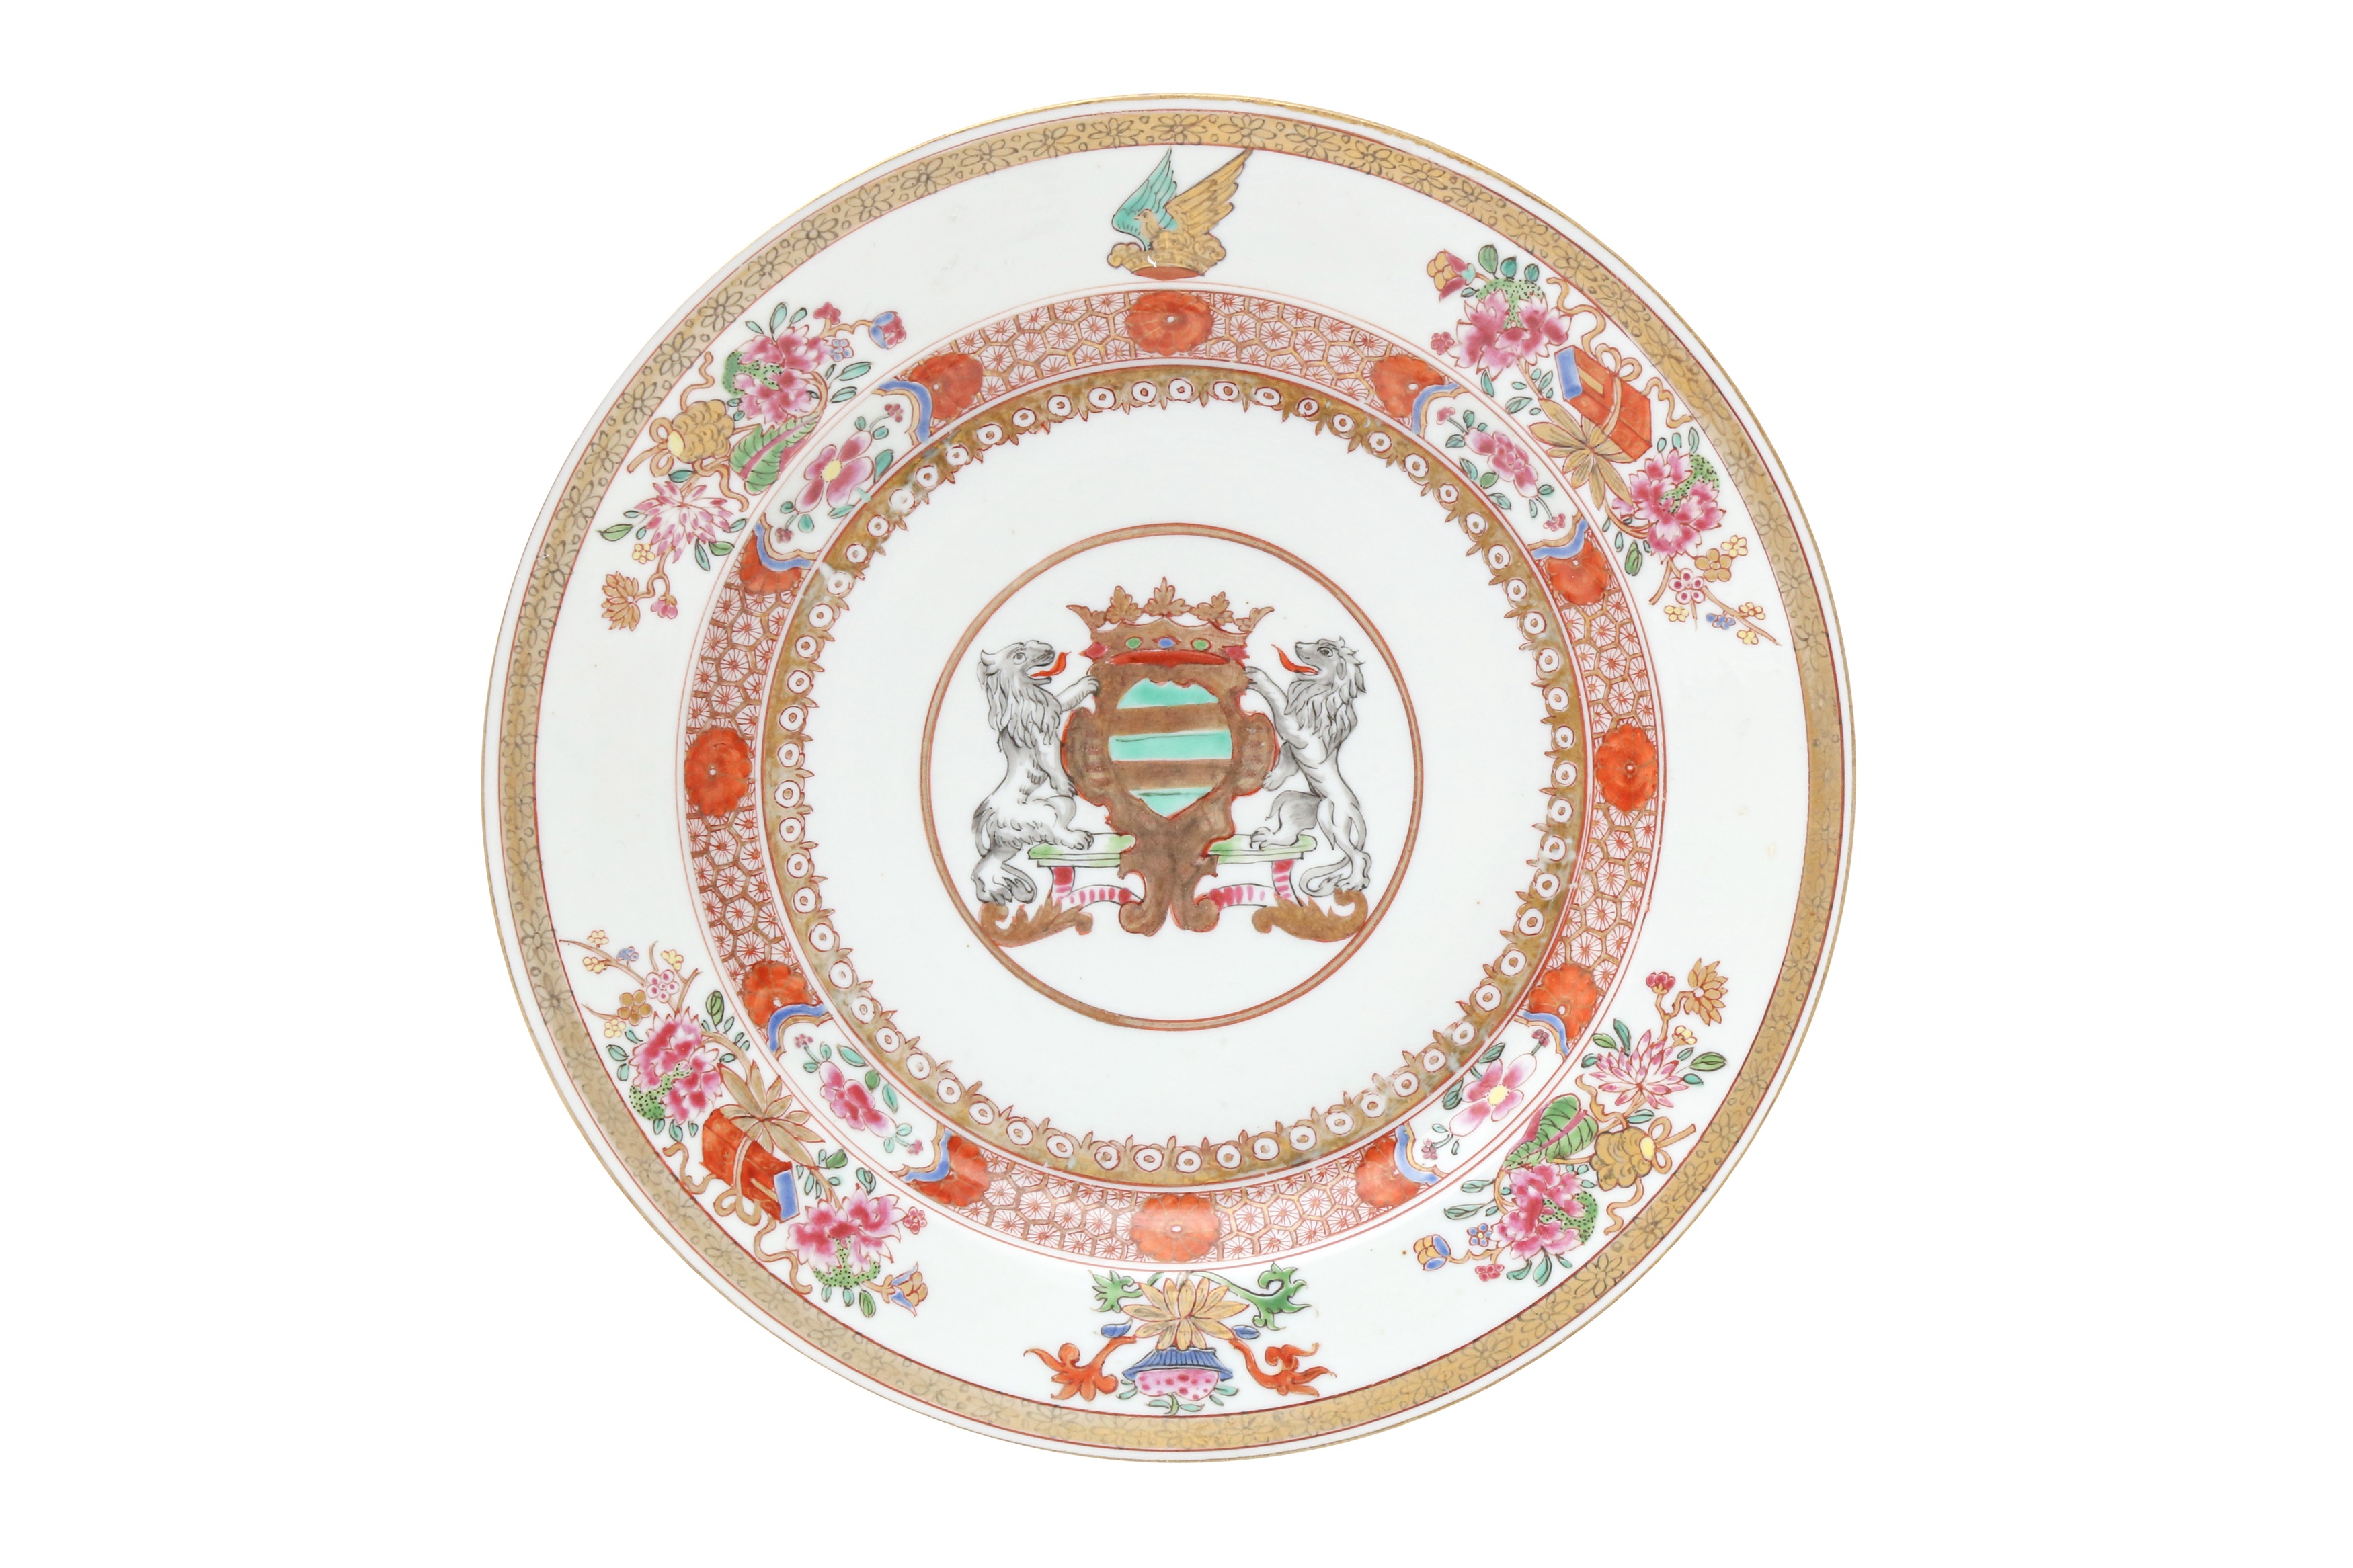 A PAIR OF CHINESE EXPORT FAMILLE-ROSE ARMORIAL DISHES 清十八至十九世紀 外銷粉彩徽章紋盤一對 - Image 3 of 3